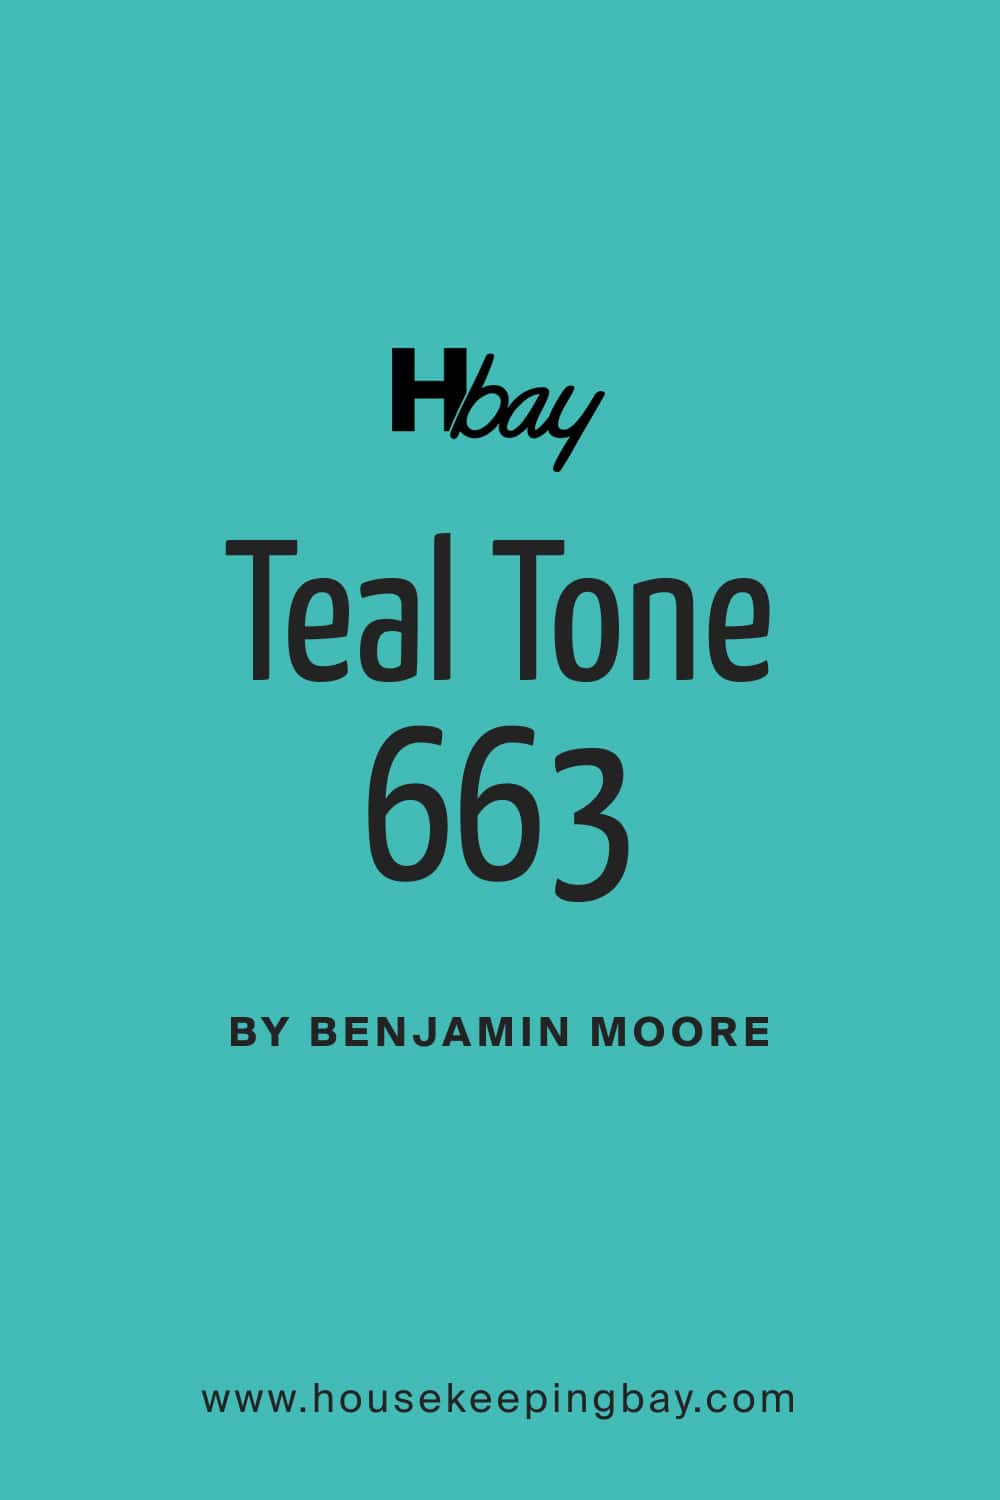 BM Teal Tone 663 Paint Color by Benjamin Moore